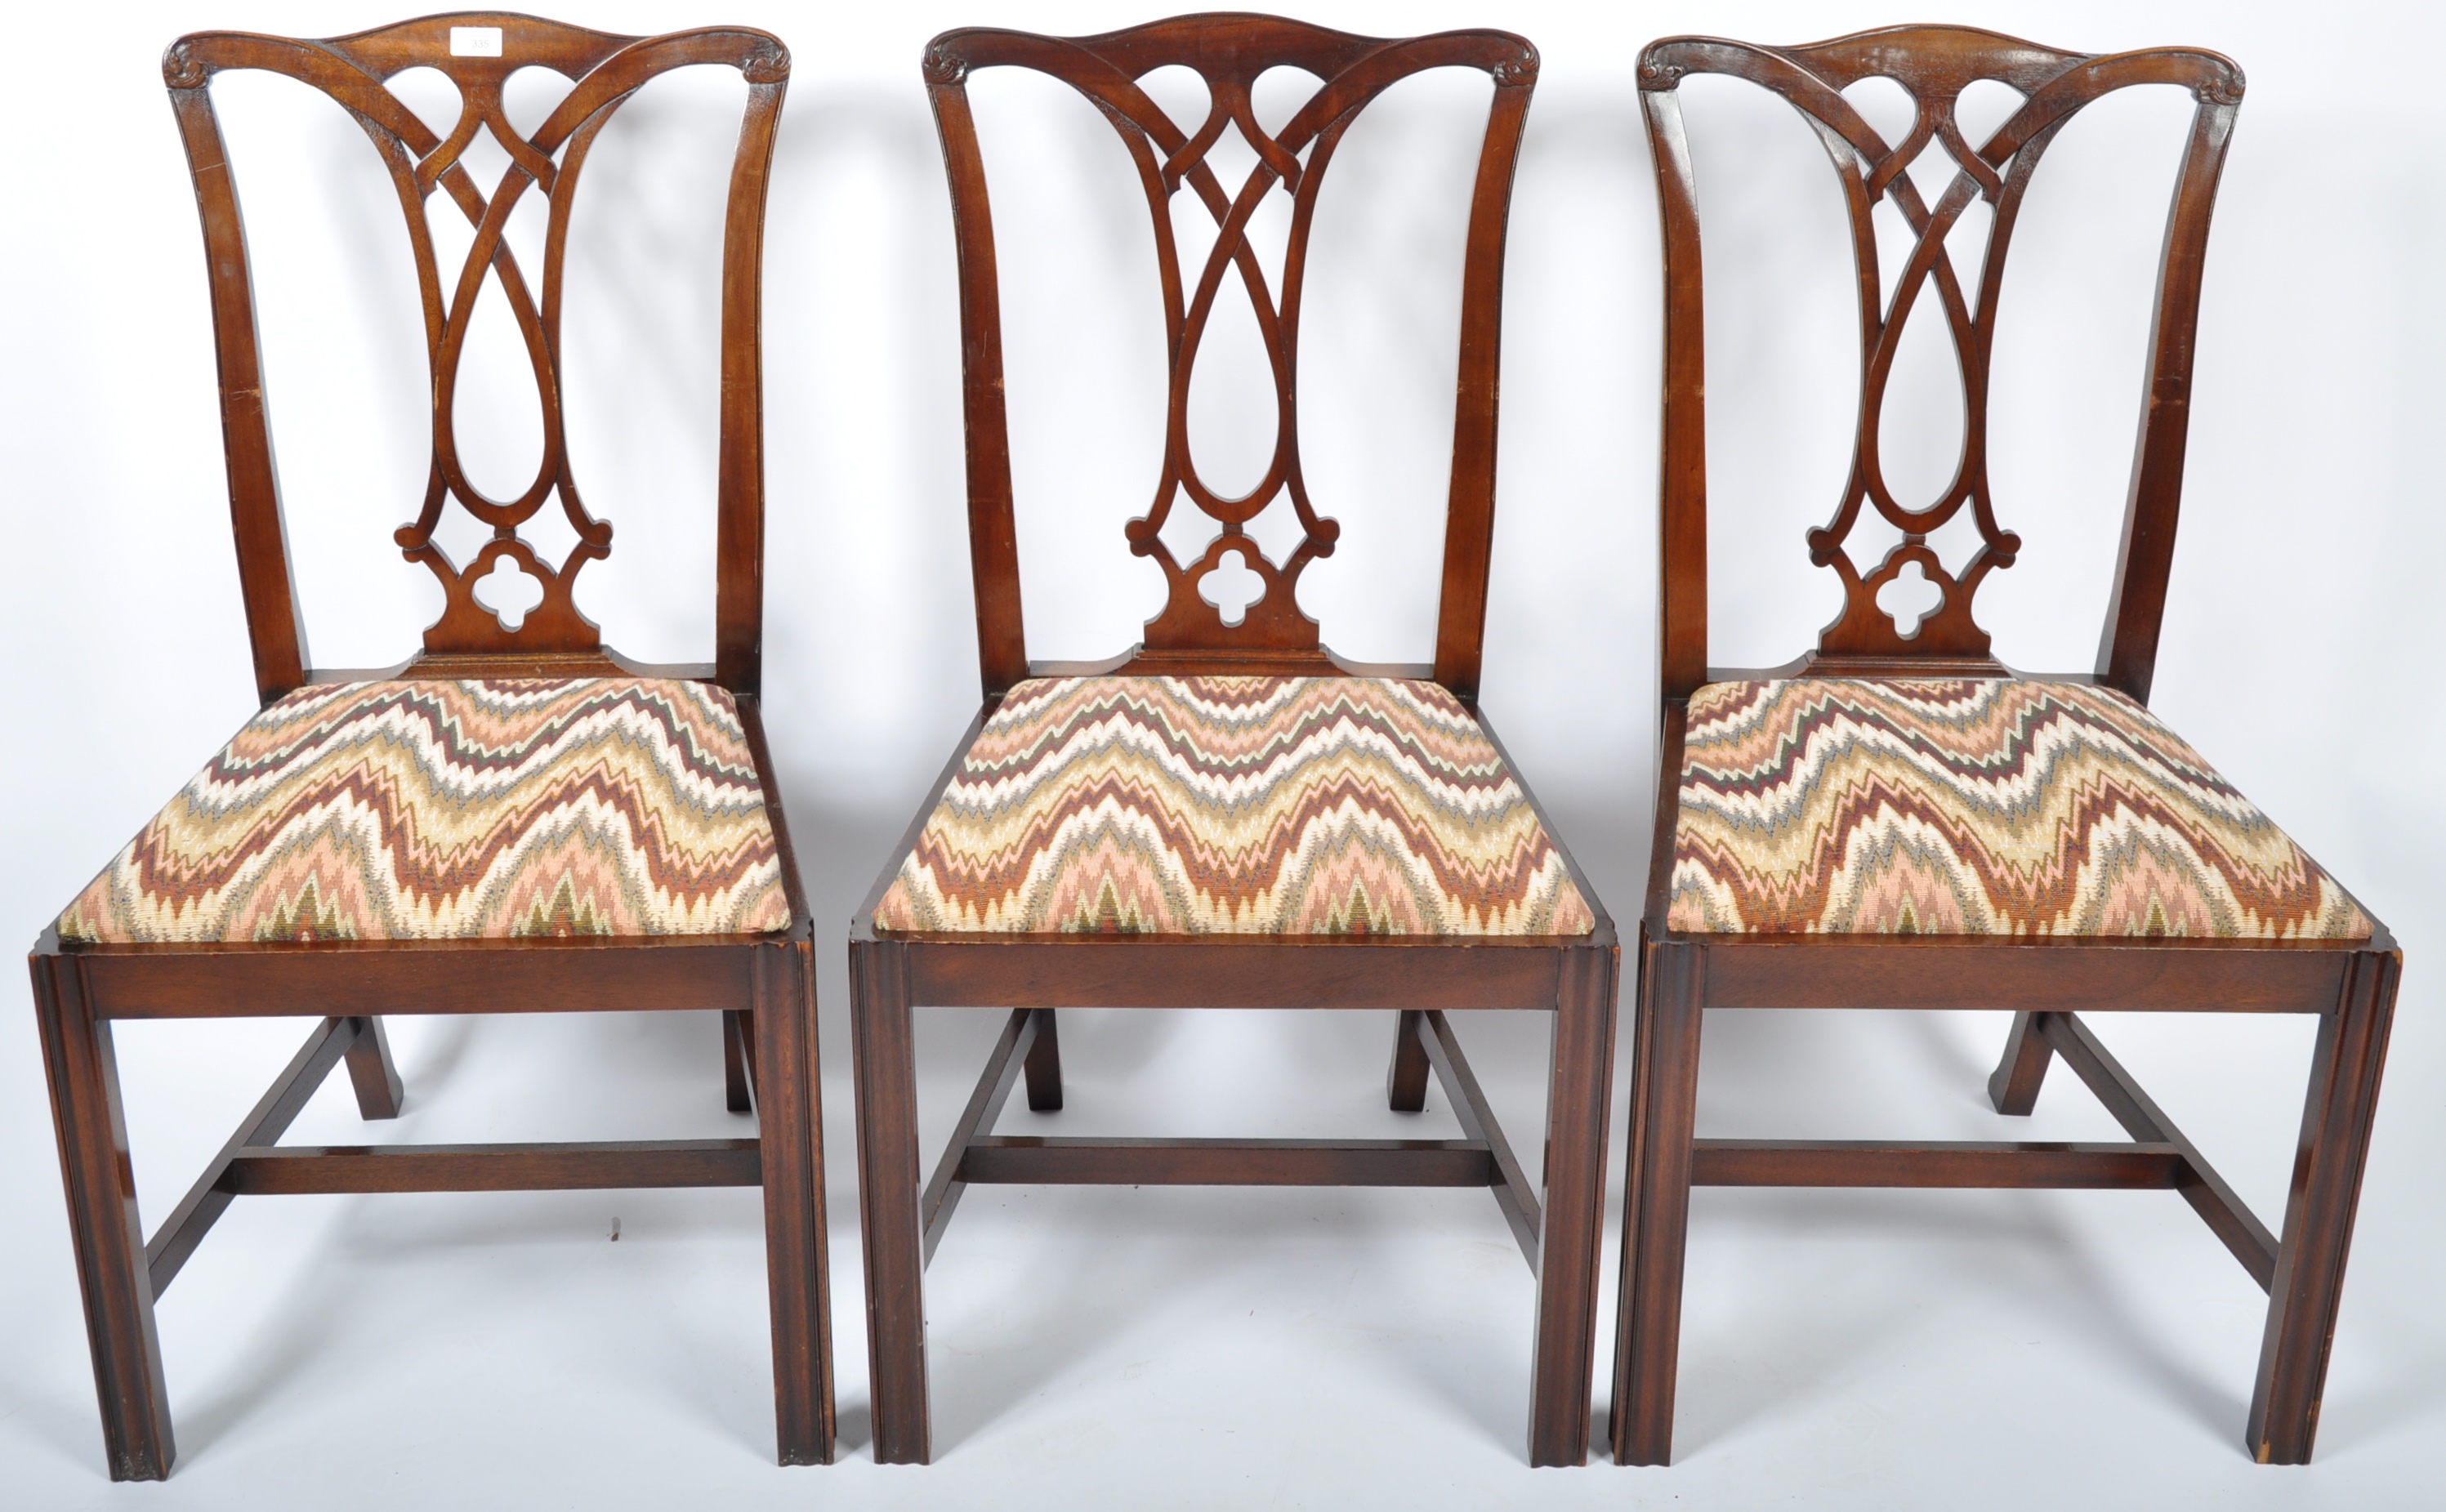 SET OF SIX 20TH CENTURY CHIPPENDALE REVIVAL CHAIRS - Image 5 of 8